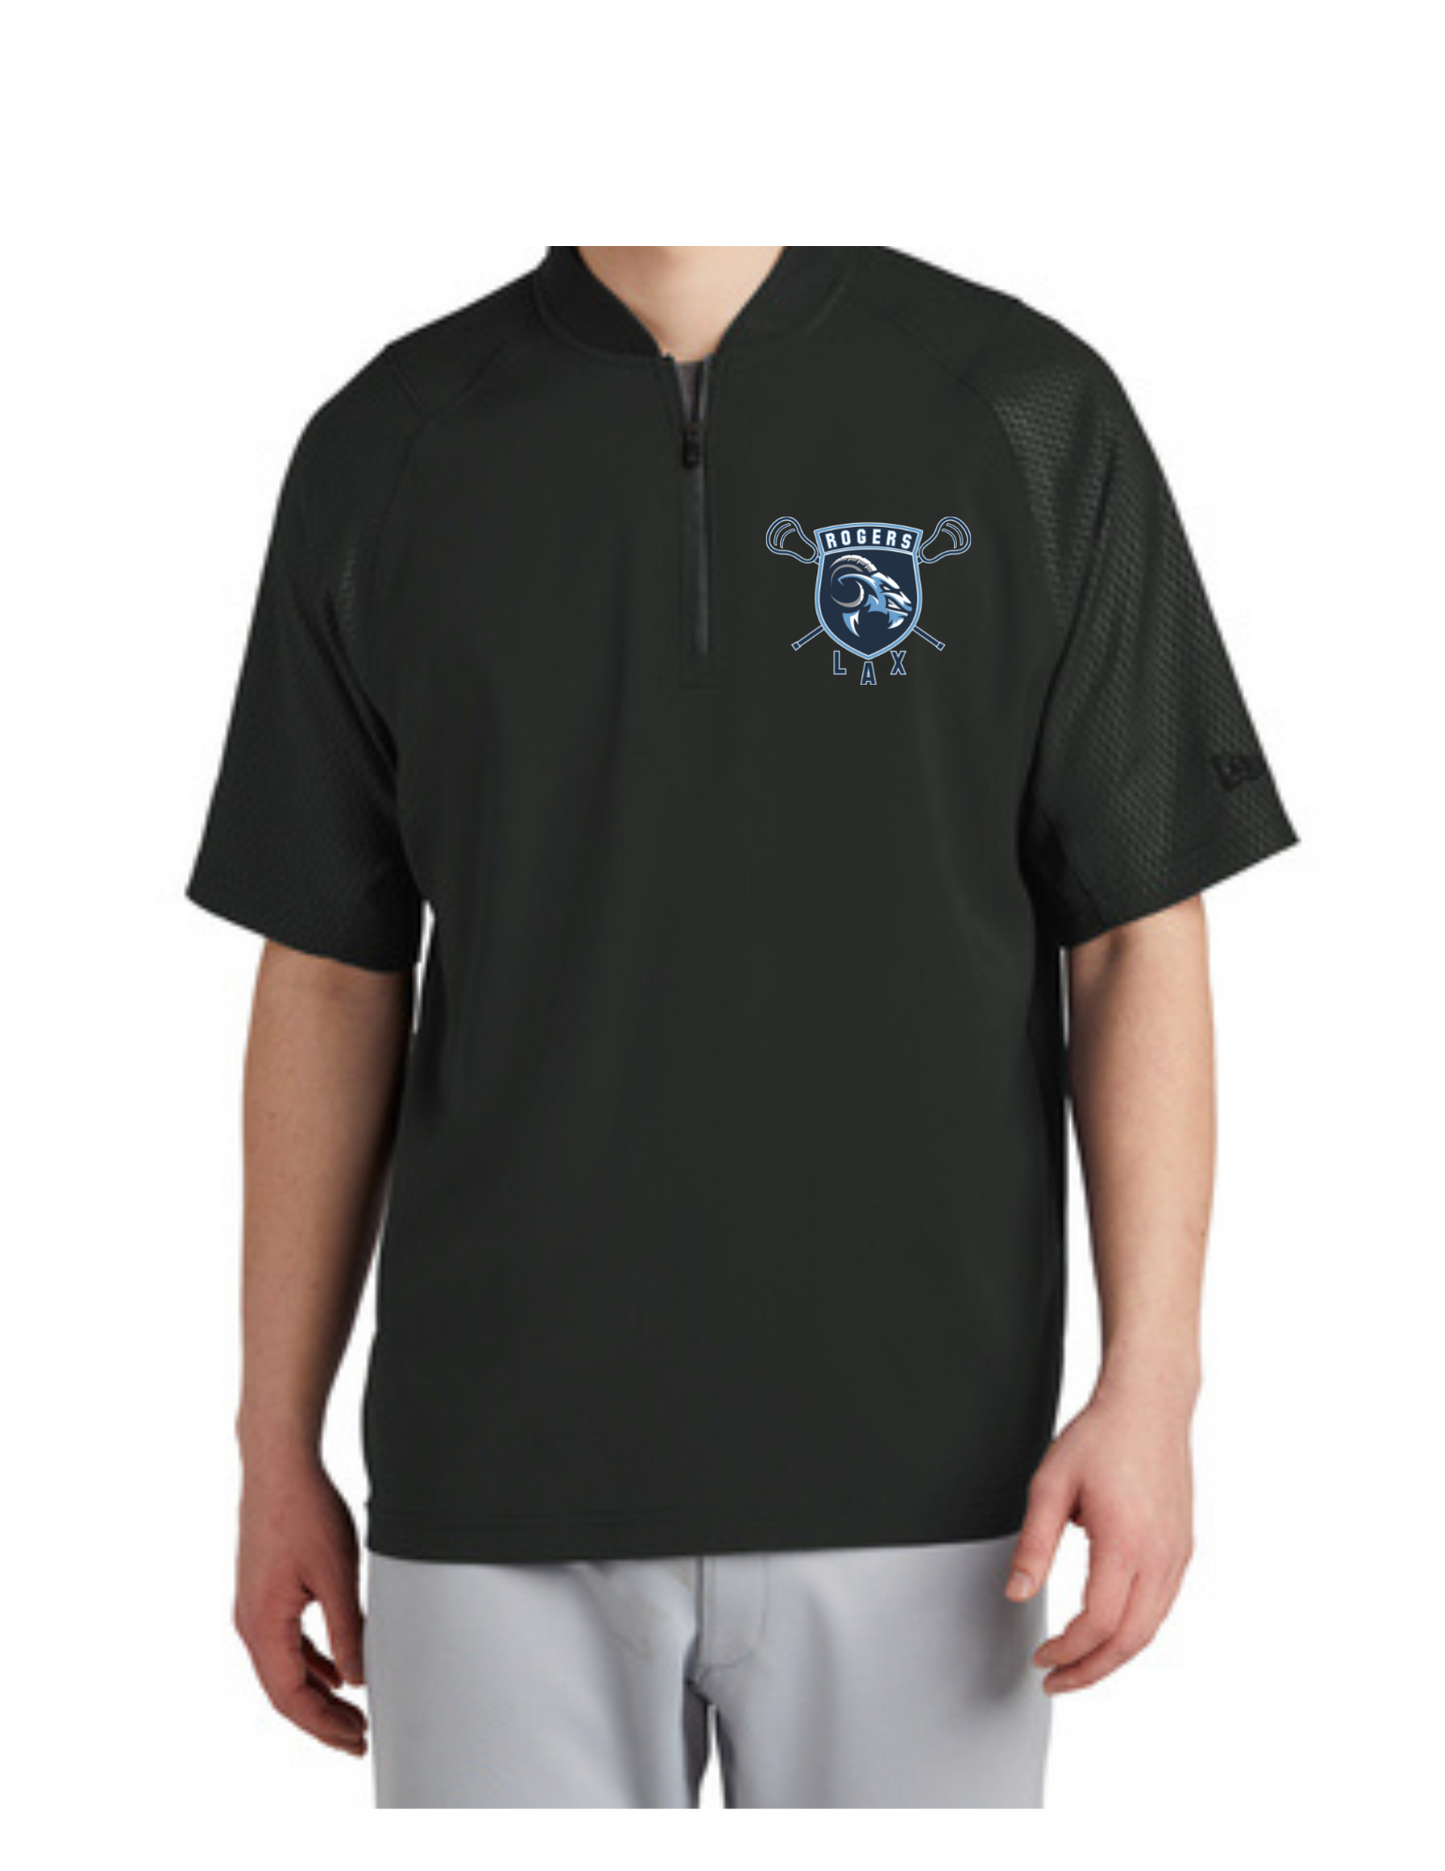 Rogers New Era Cage Short Sleeve 1/4 Zip Jacket (click for additional options)